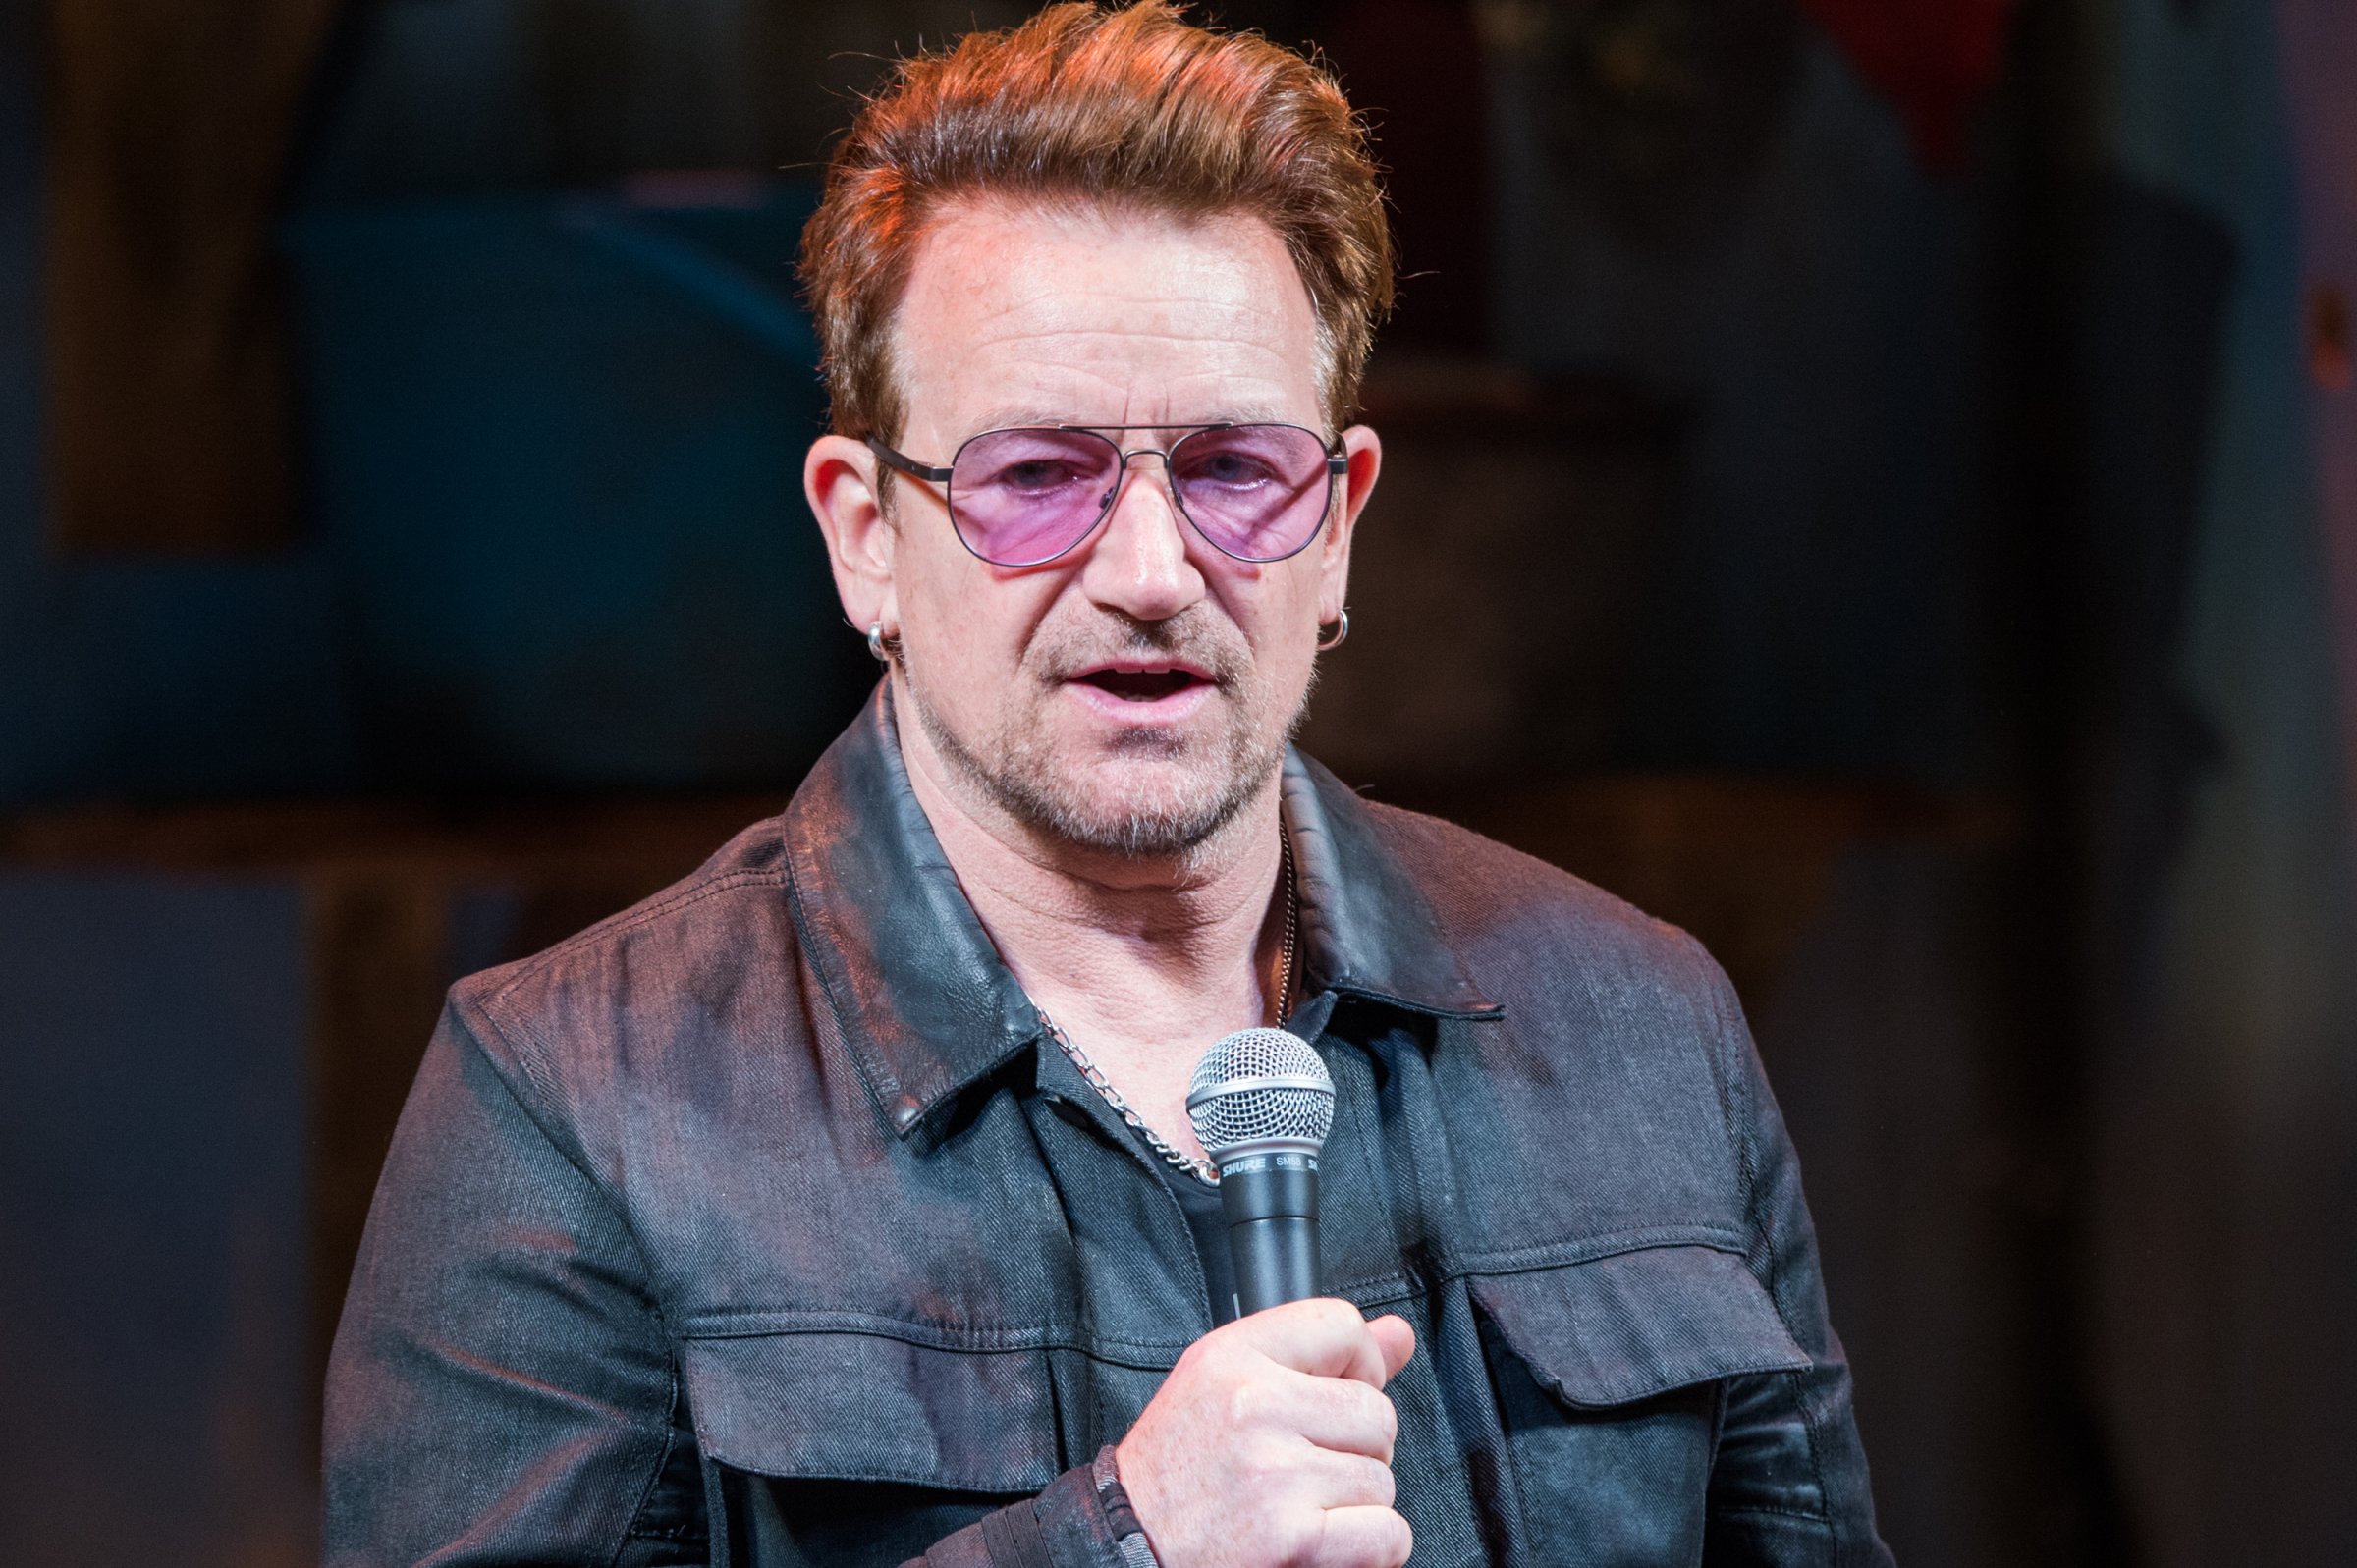 U2 band member Bono attends "Eclipsed" To Launch A Dedications Series In Honor Of Abducted Chibok Girls Of Northern Nigeria at Golden Theatre on April 30, 2016 in New York City.